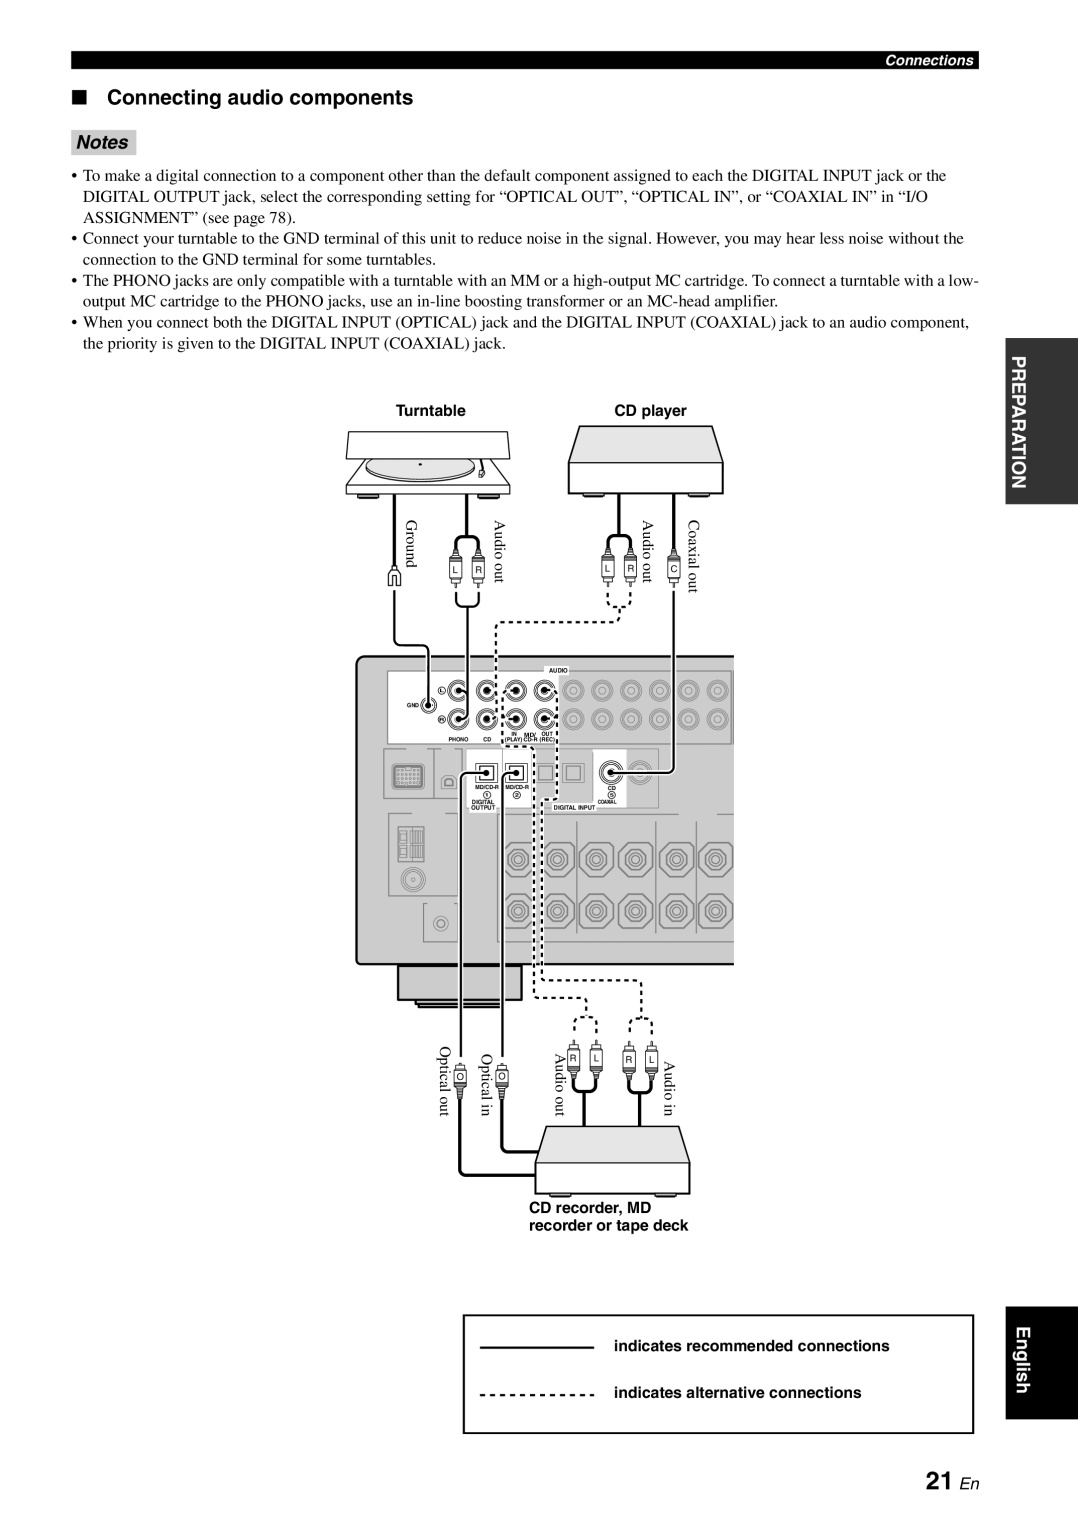 Yamaha HTR-6060 owner manual 21 En, Connecting audio components 